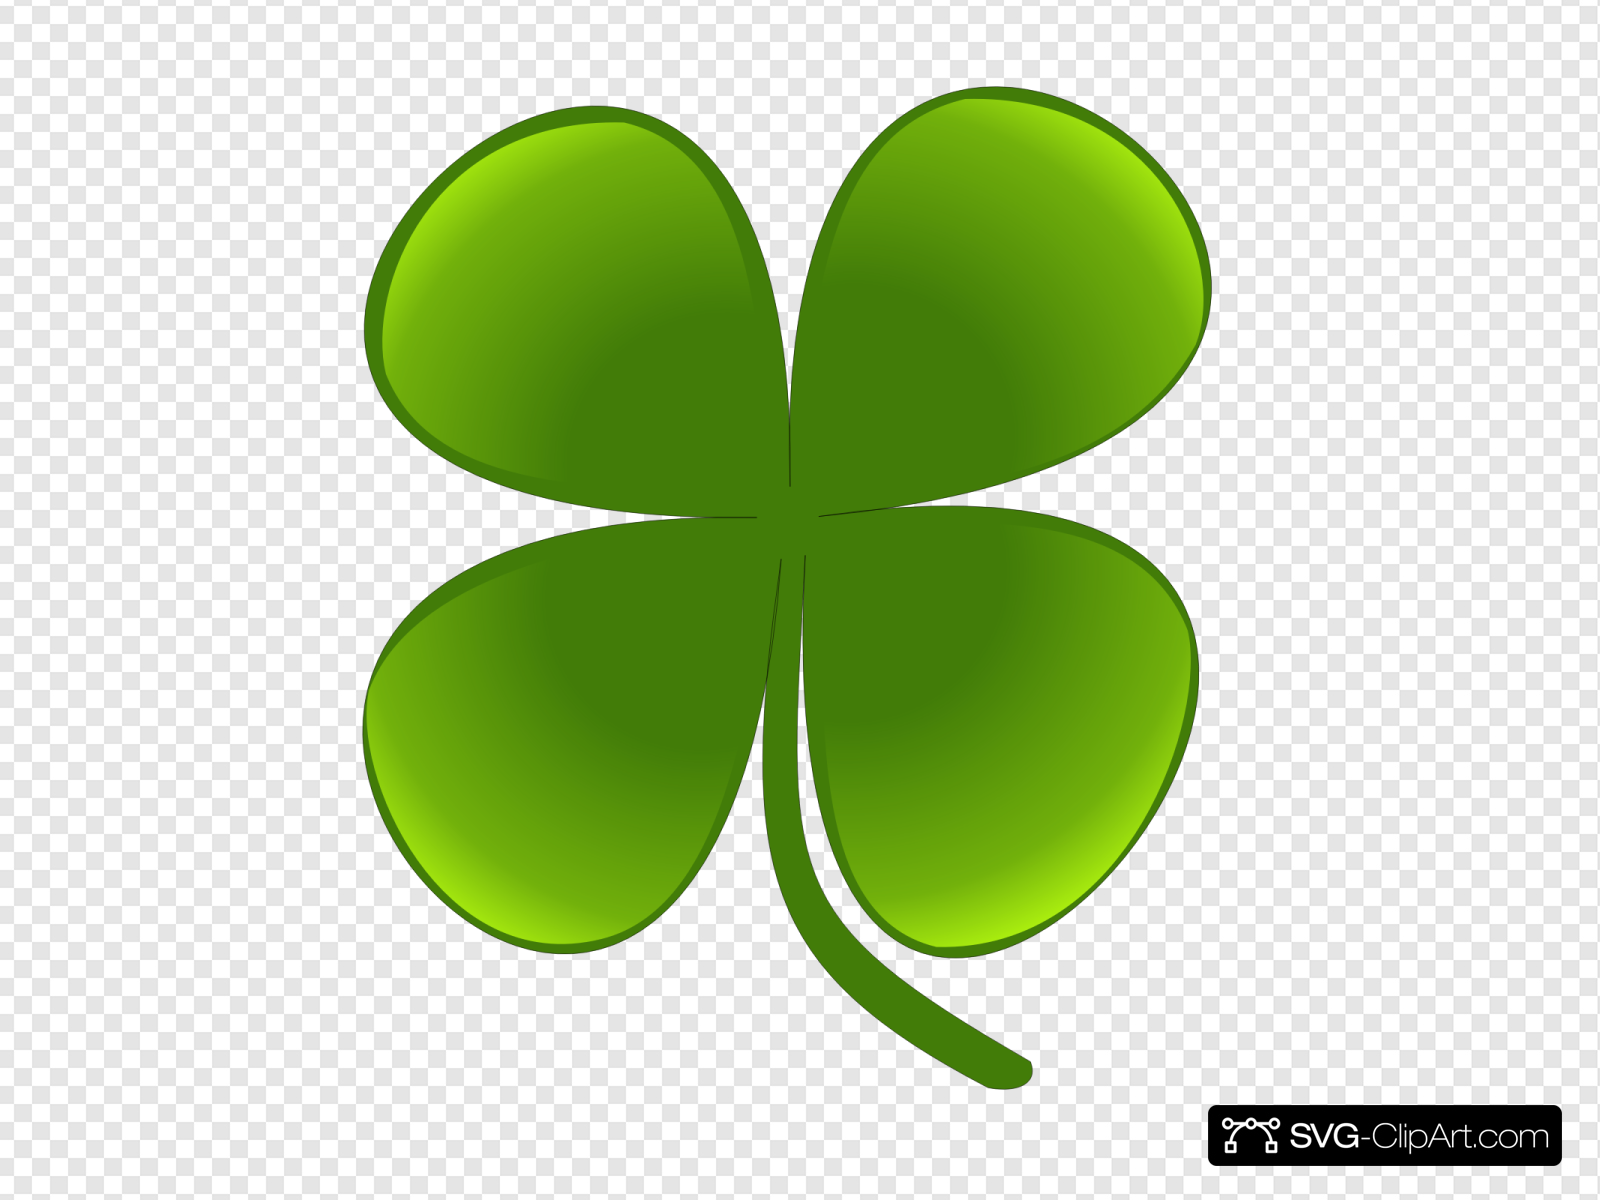 Shamrock for march.